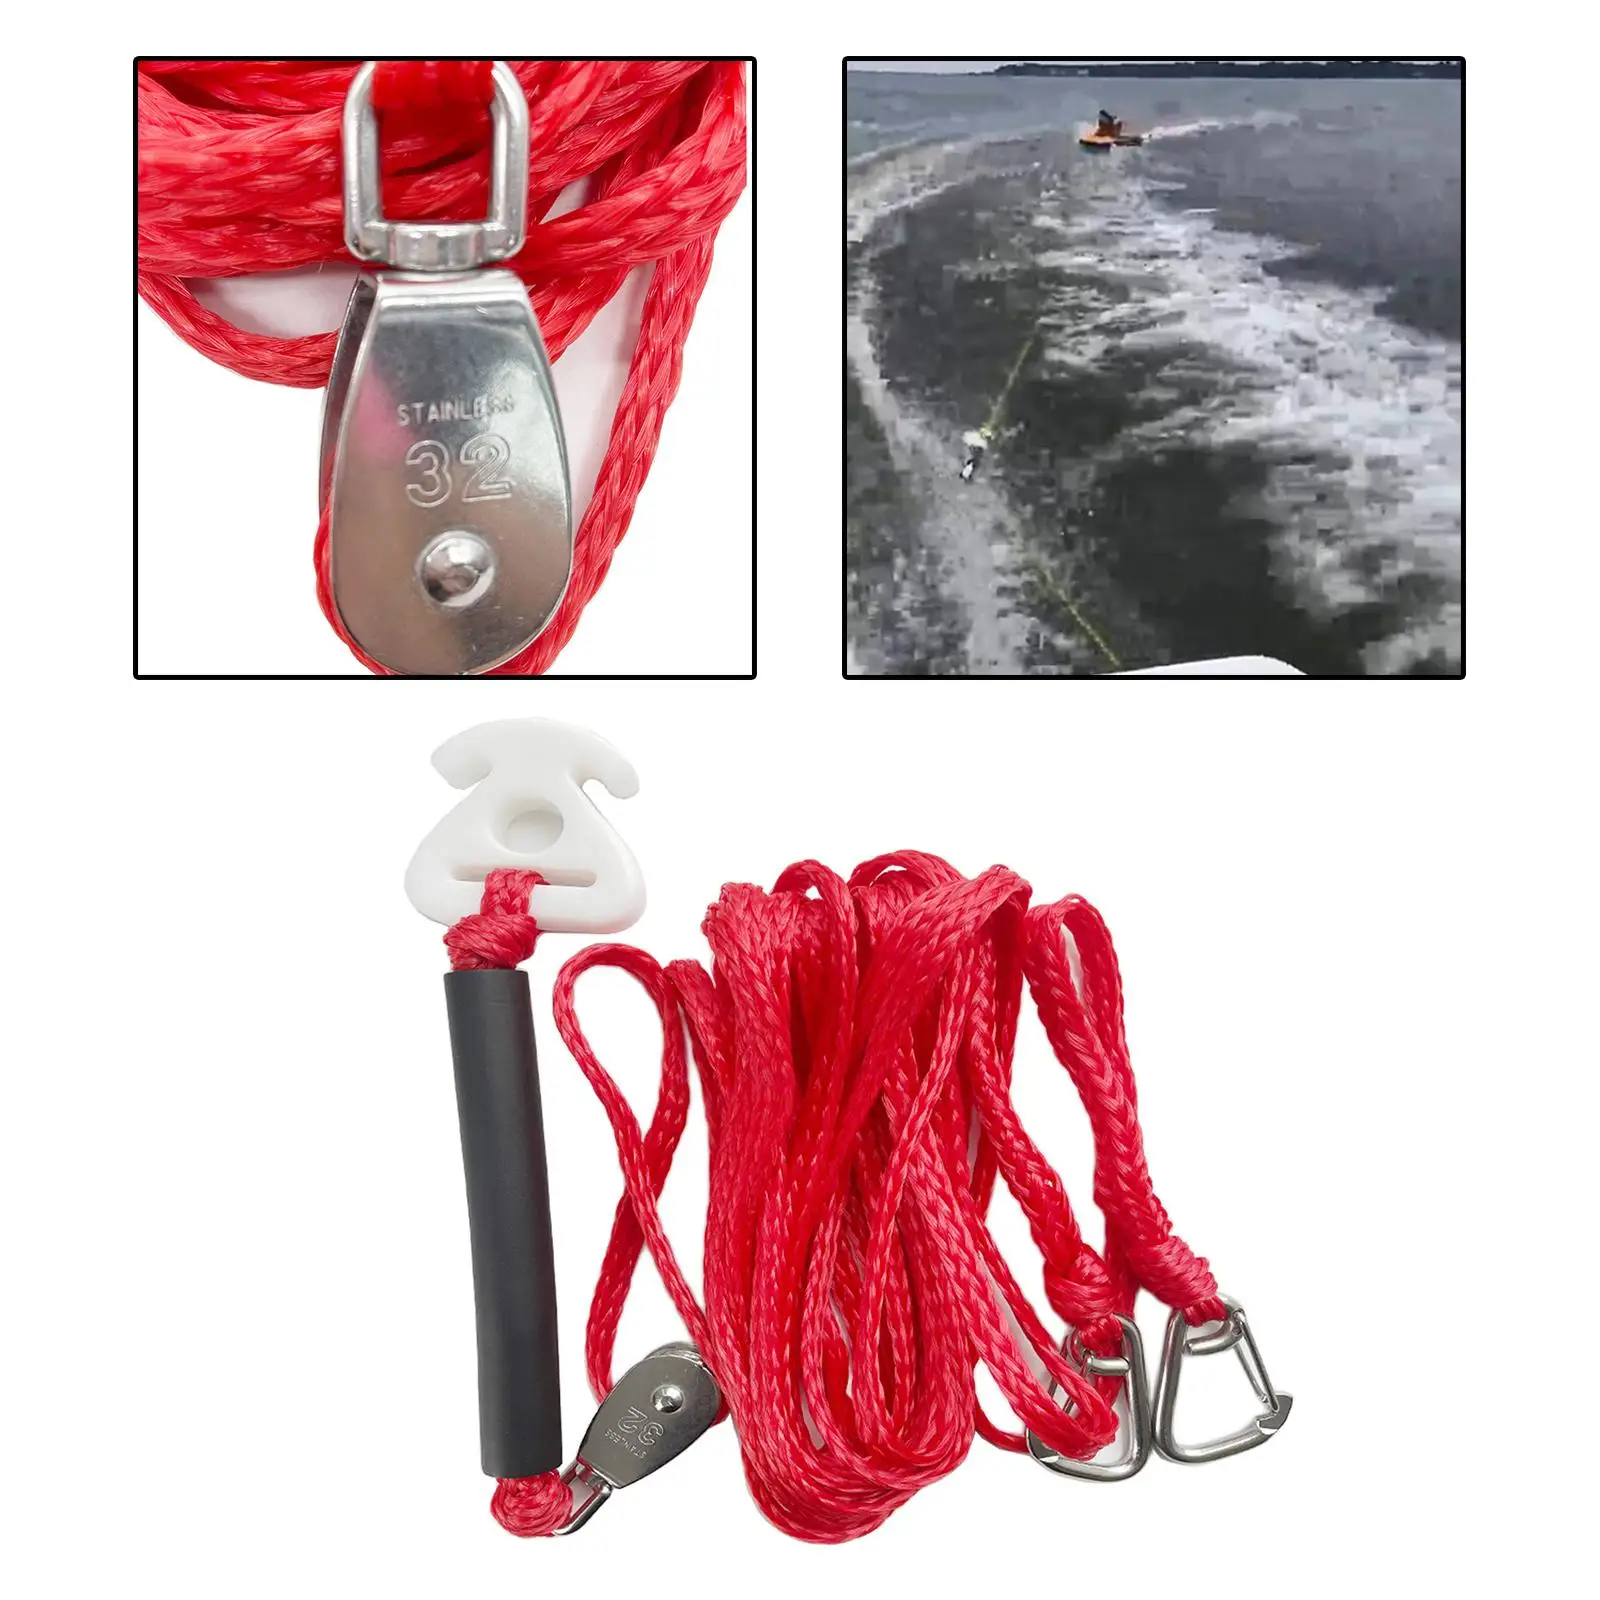 Pulley Boat Tow Harness Watersports Rope 1 for Boating Water Skiing